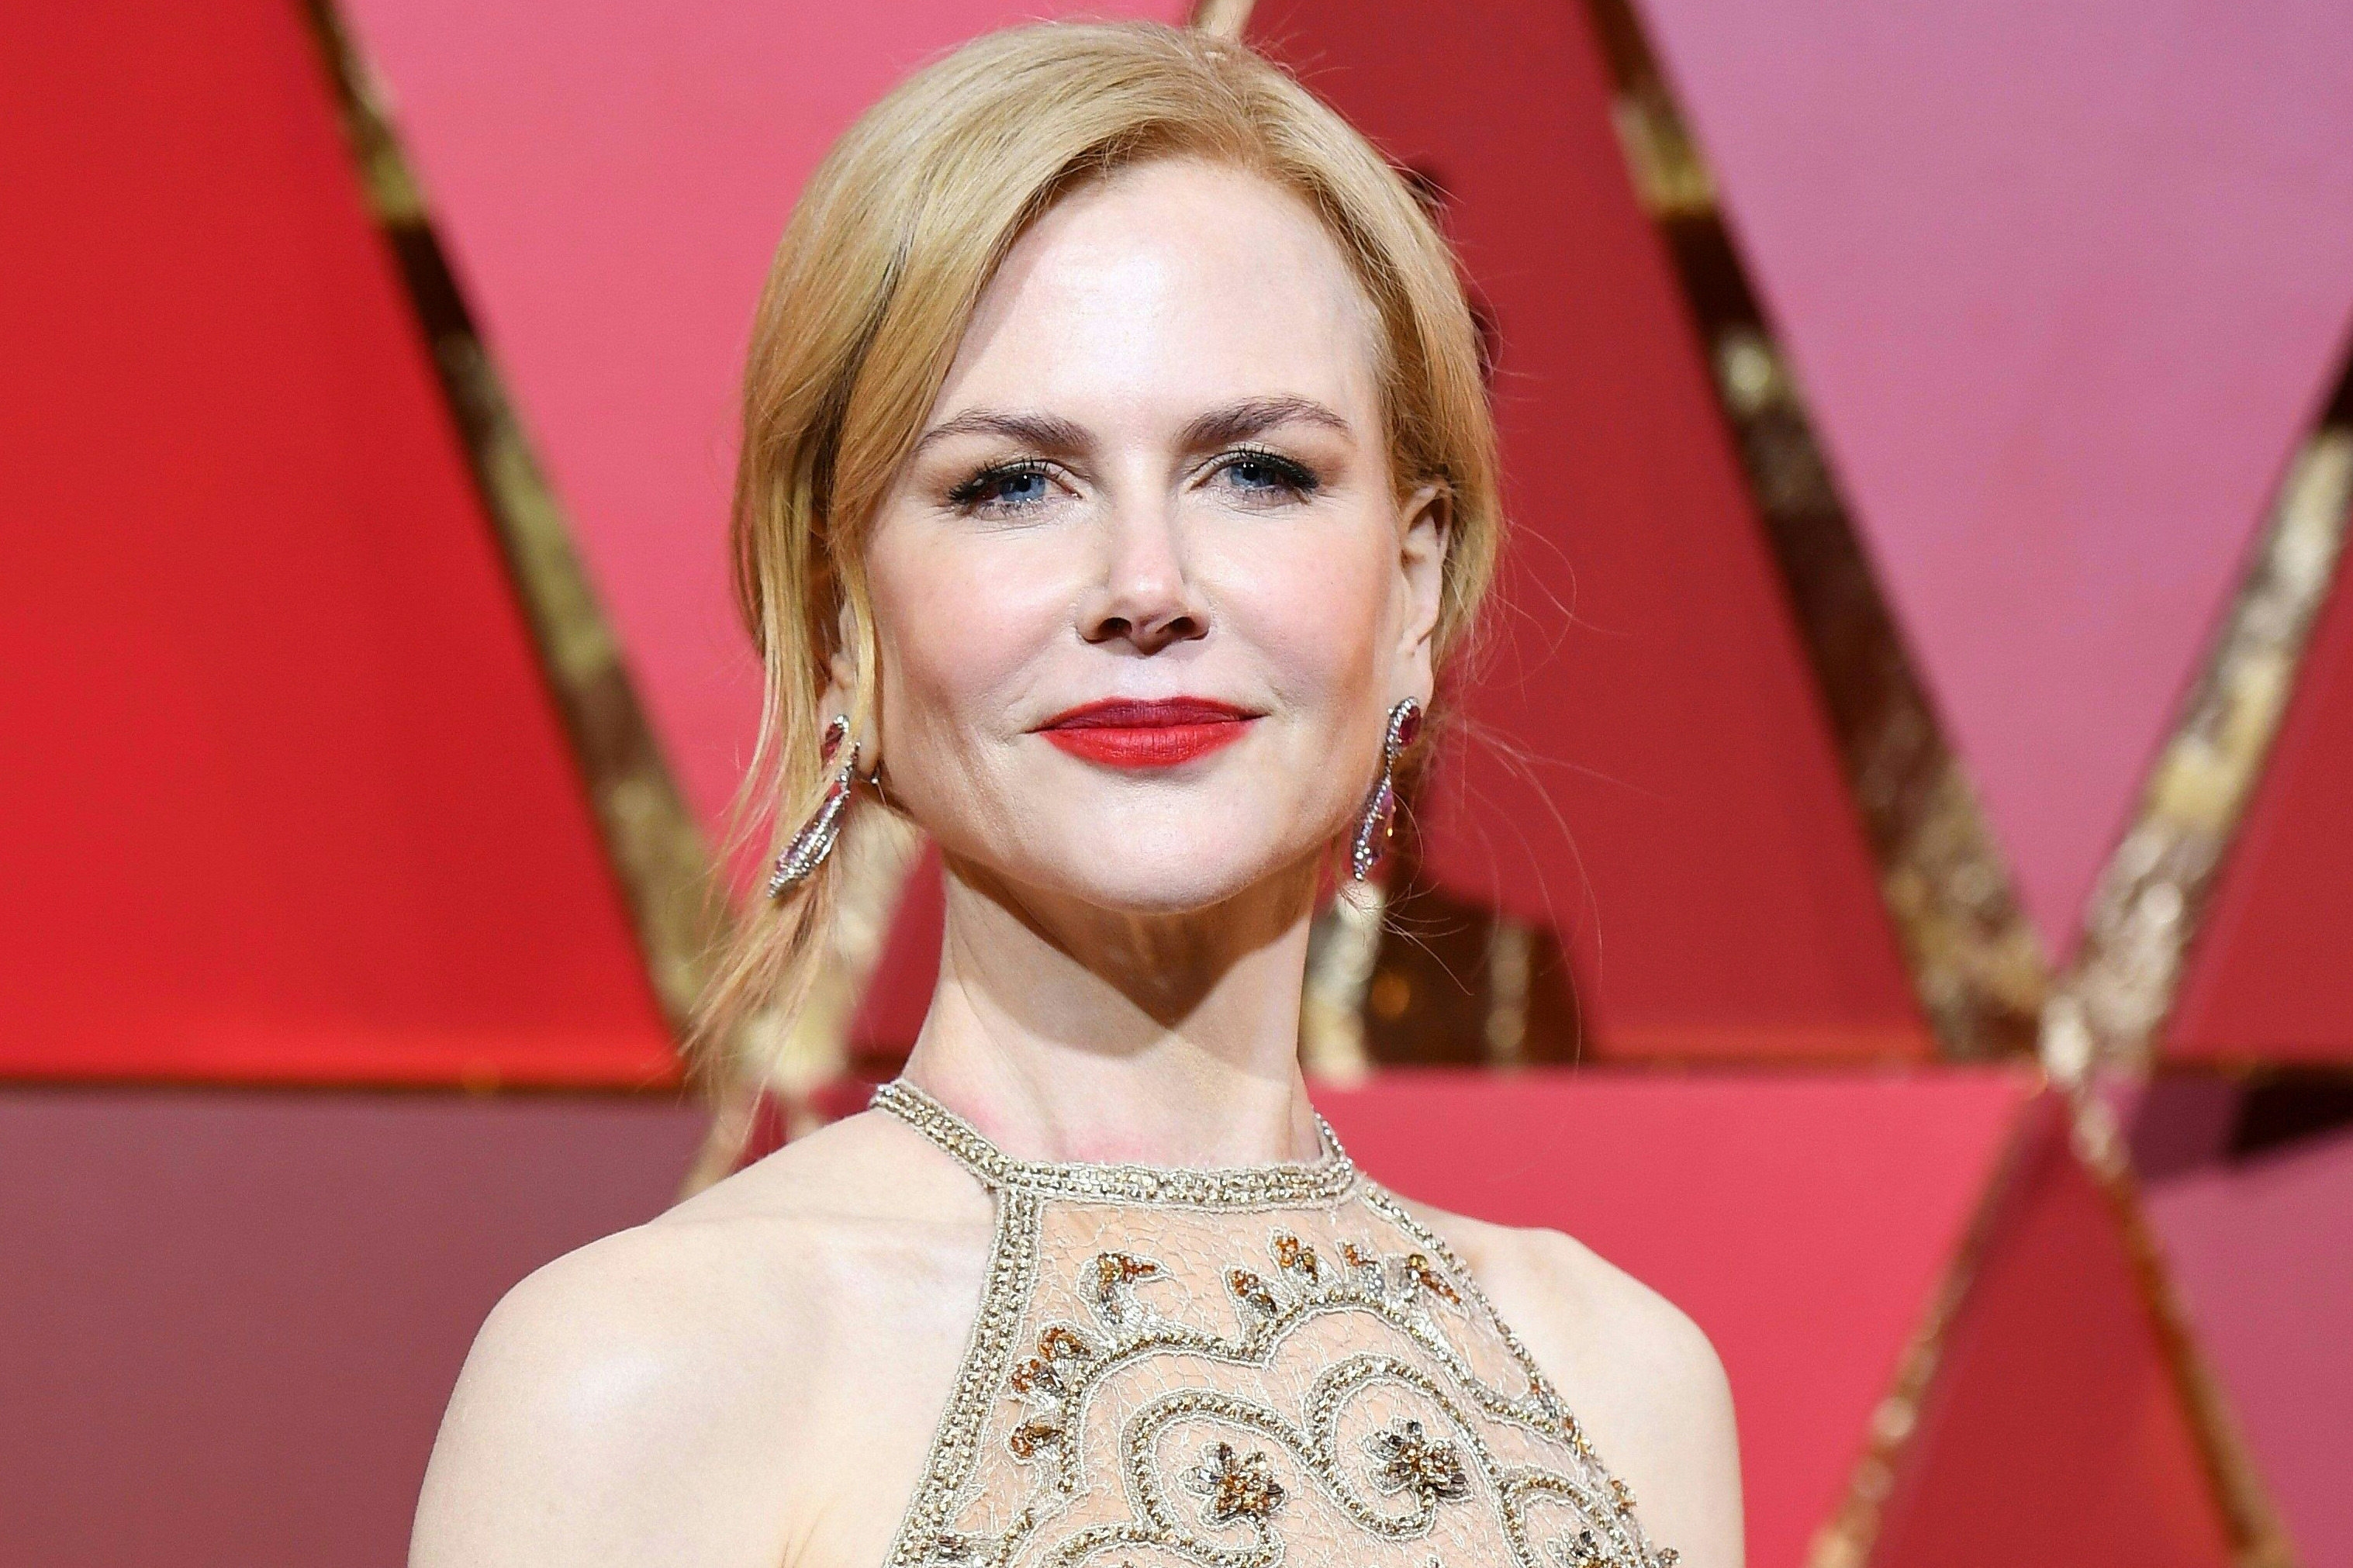 Nicole Kidman arrives on the red carpet for the 89th Oscars, on Feb. 26, 2017 in Hollywood, Calif. (Angela Weiss—AFP/Getty Images)